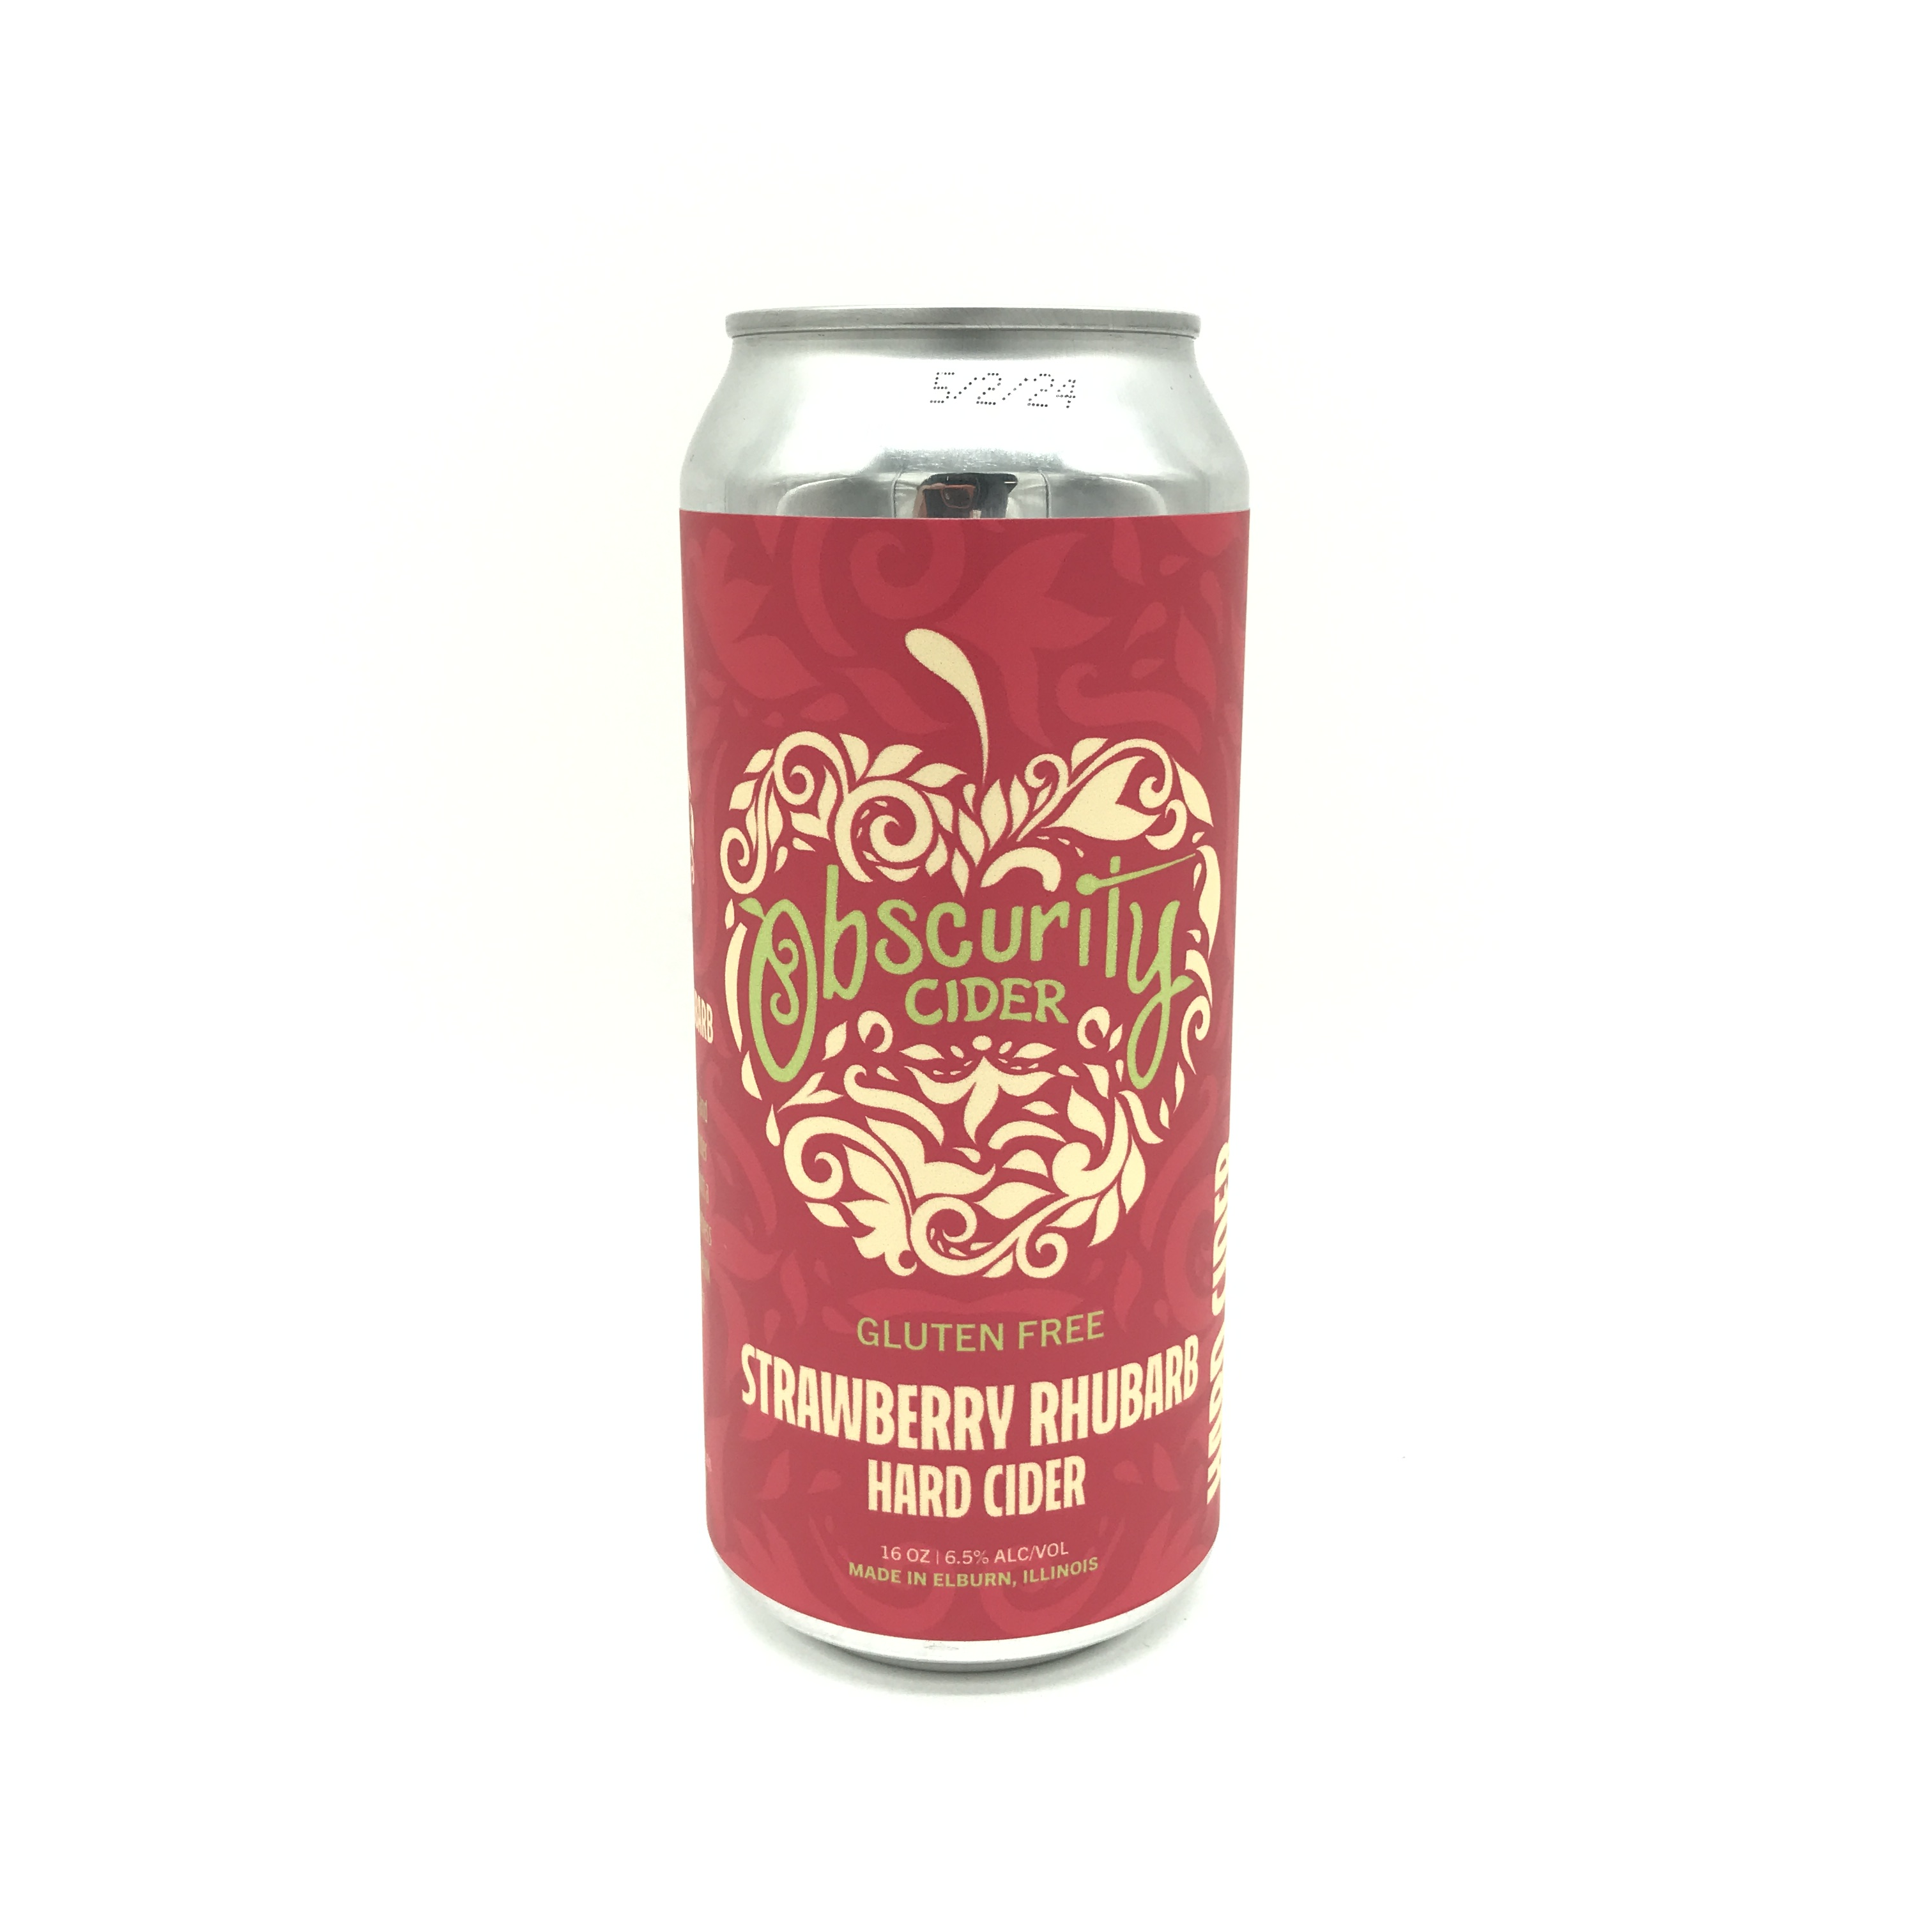 Obscurity Cider - Strawberry Rhubarb